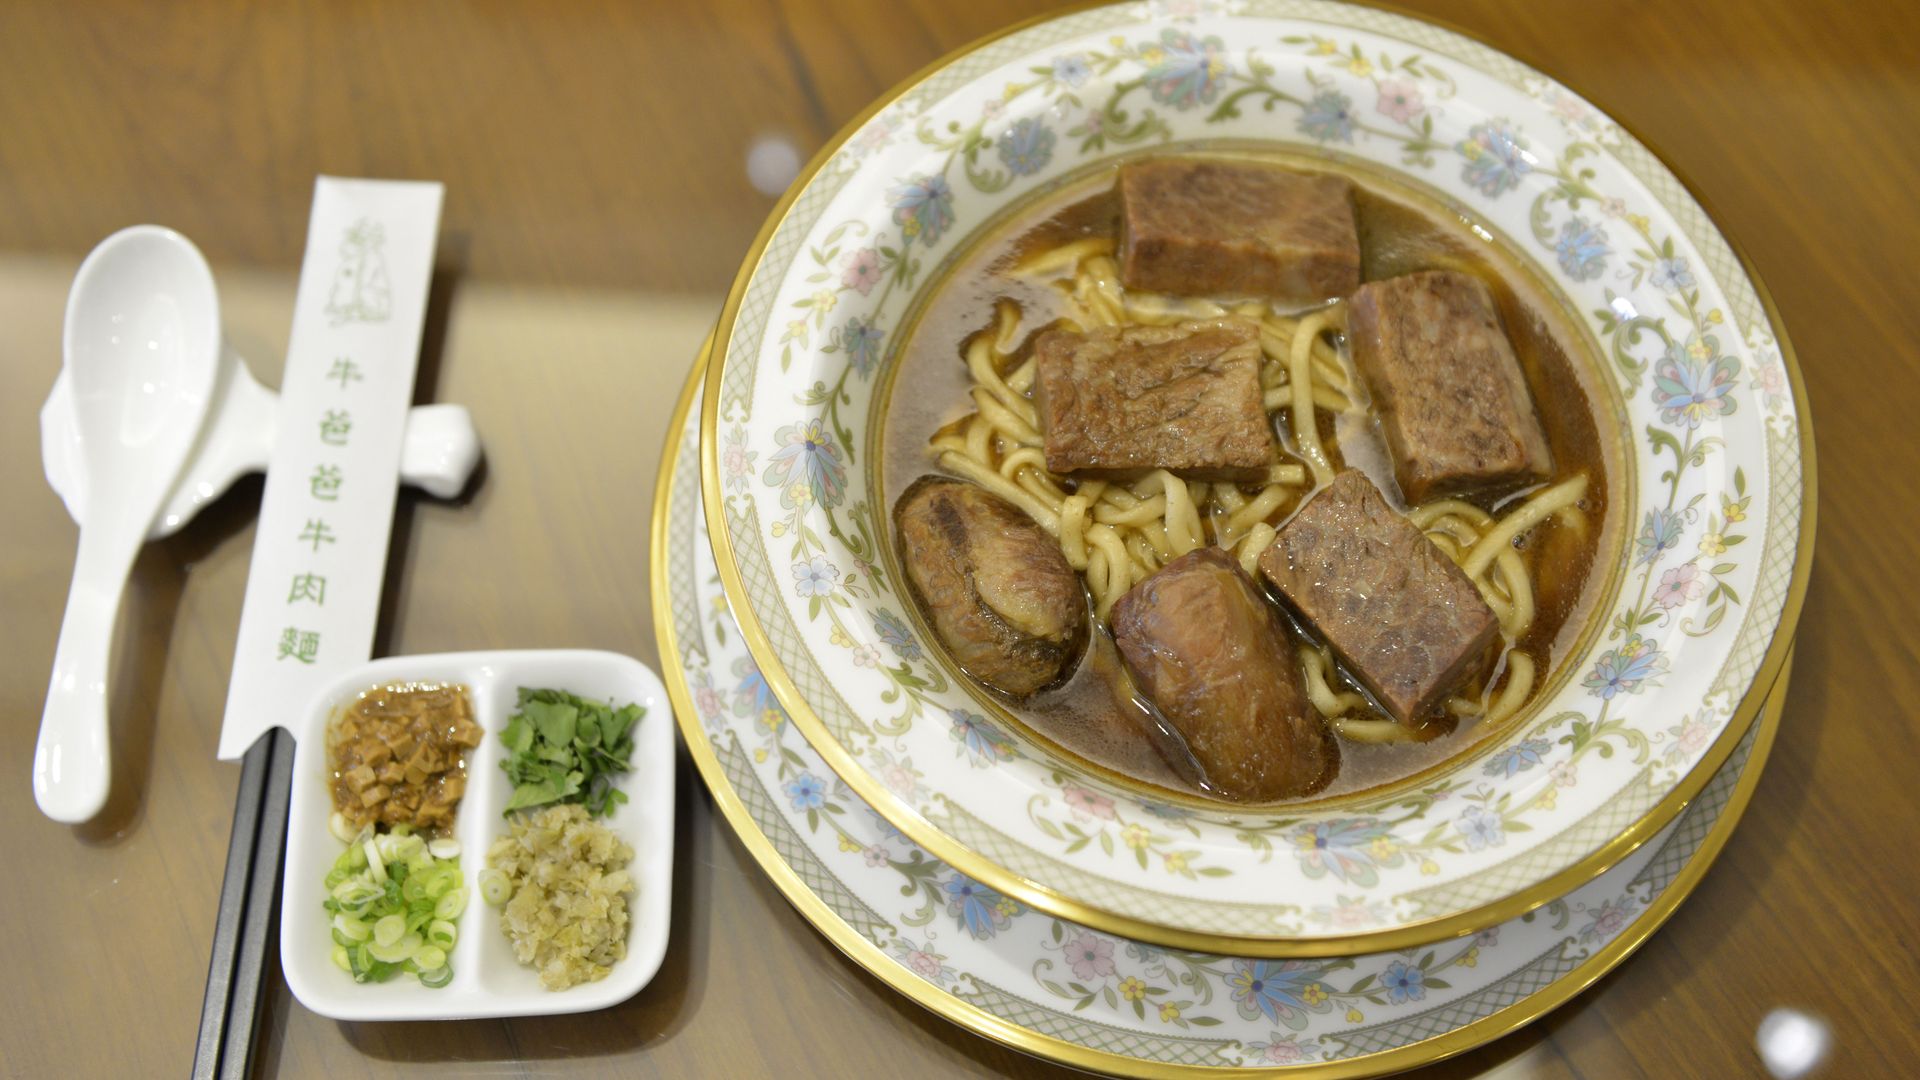 a bowl of Presidential Beef Noodles at the Niu Ba Ba restaurant in Taipei.